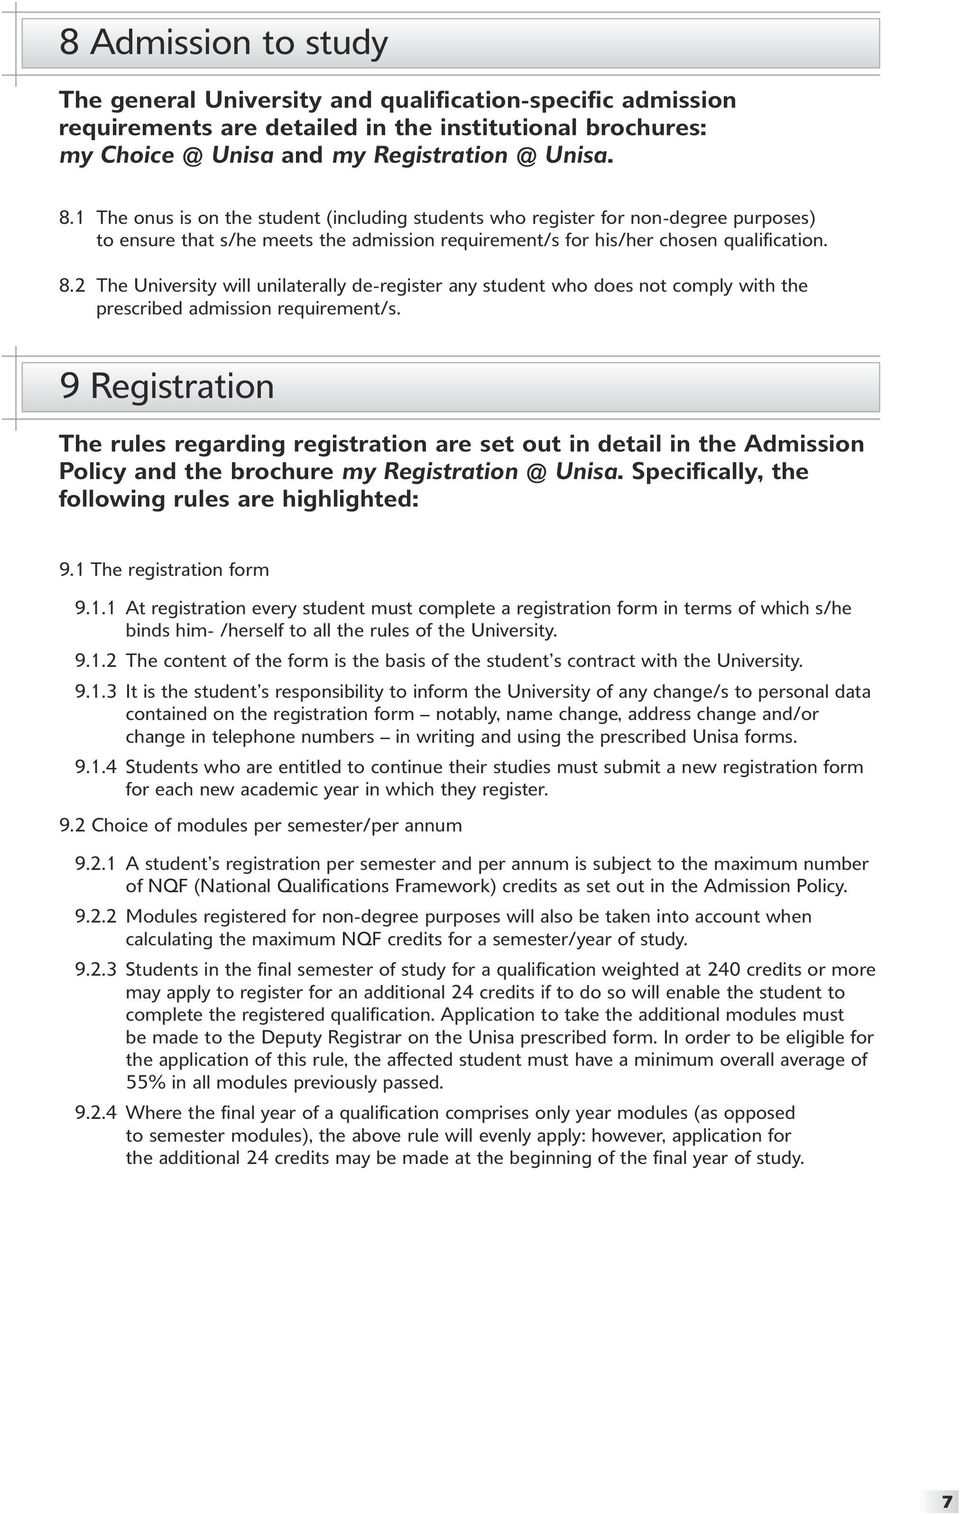 2 The University will unilaterally de-register any student who does not comply with the prescribed admission requirement/s.